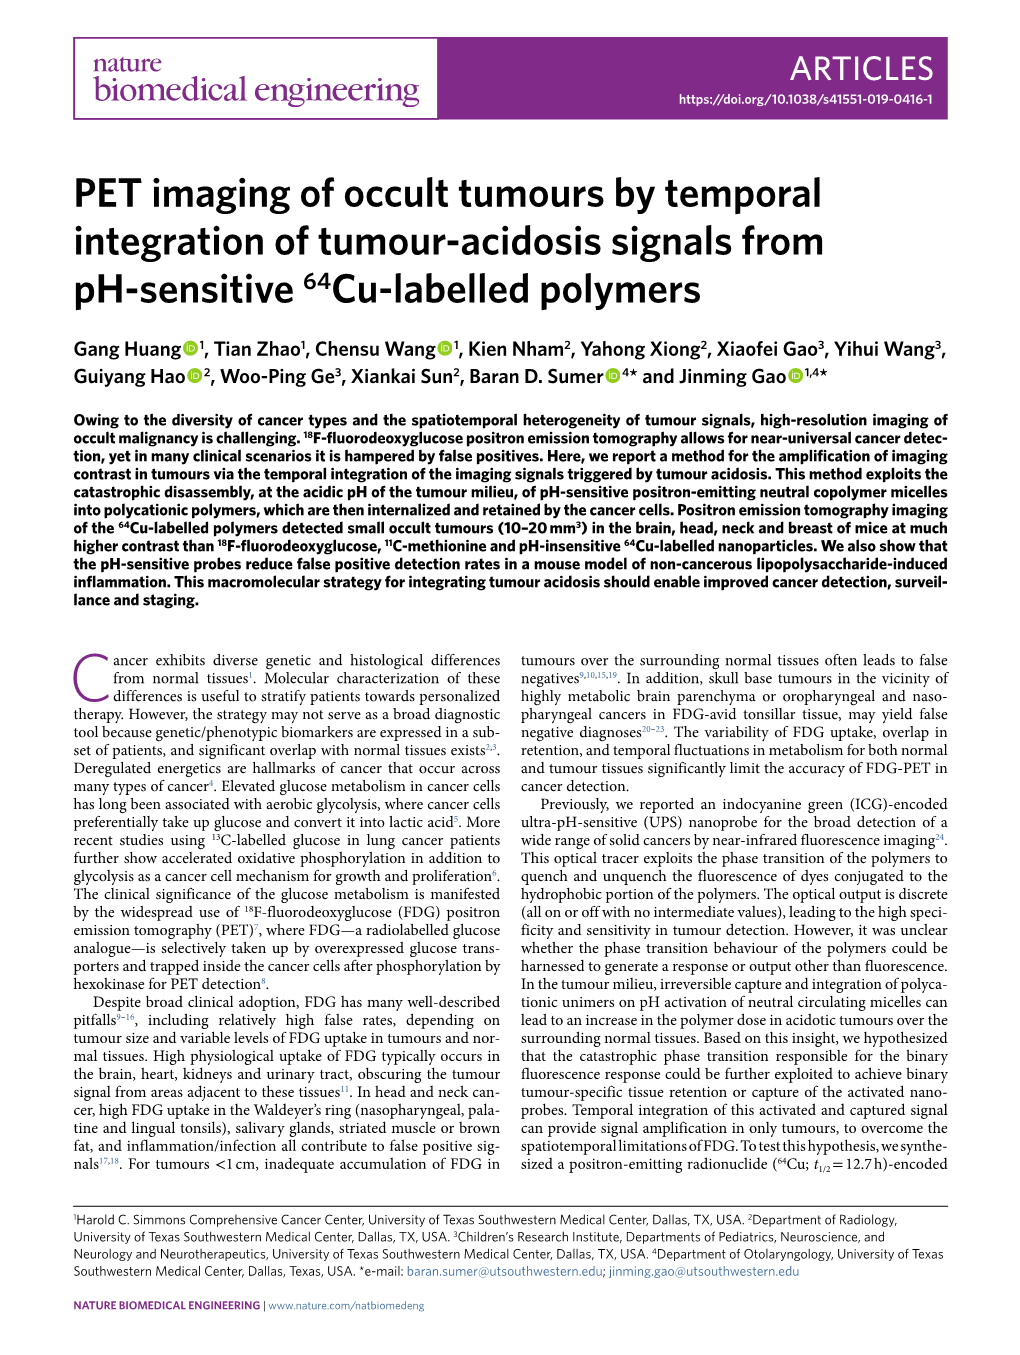 PET Imaging of Occult Tumours by Temporal Integration of Tumour-Acidosis Signals from Ph-Sensitive 64Cu-Labelled Polymers